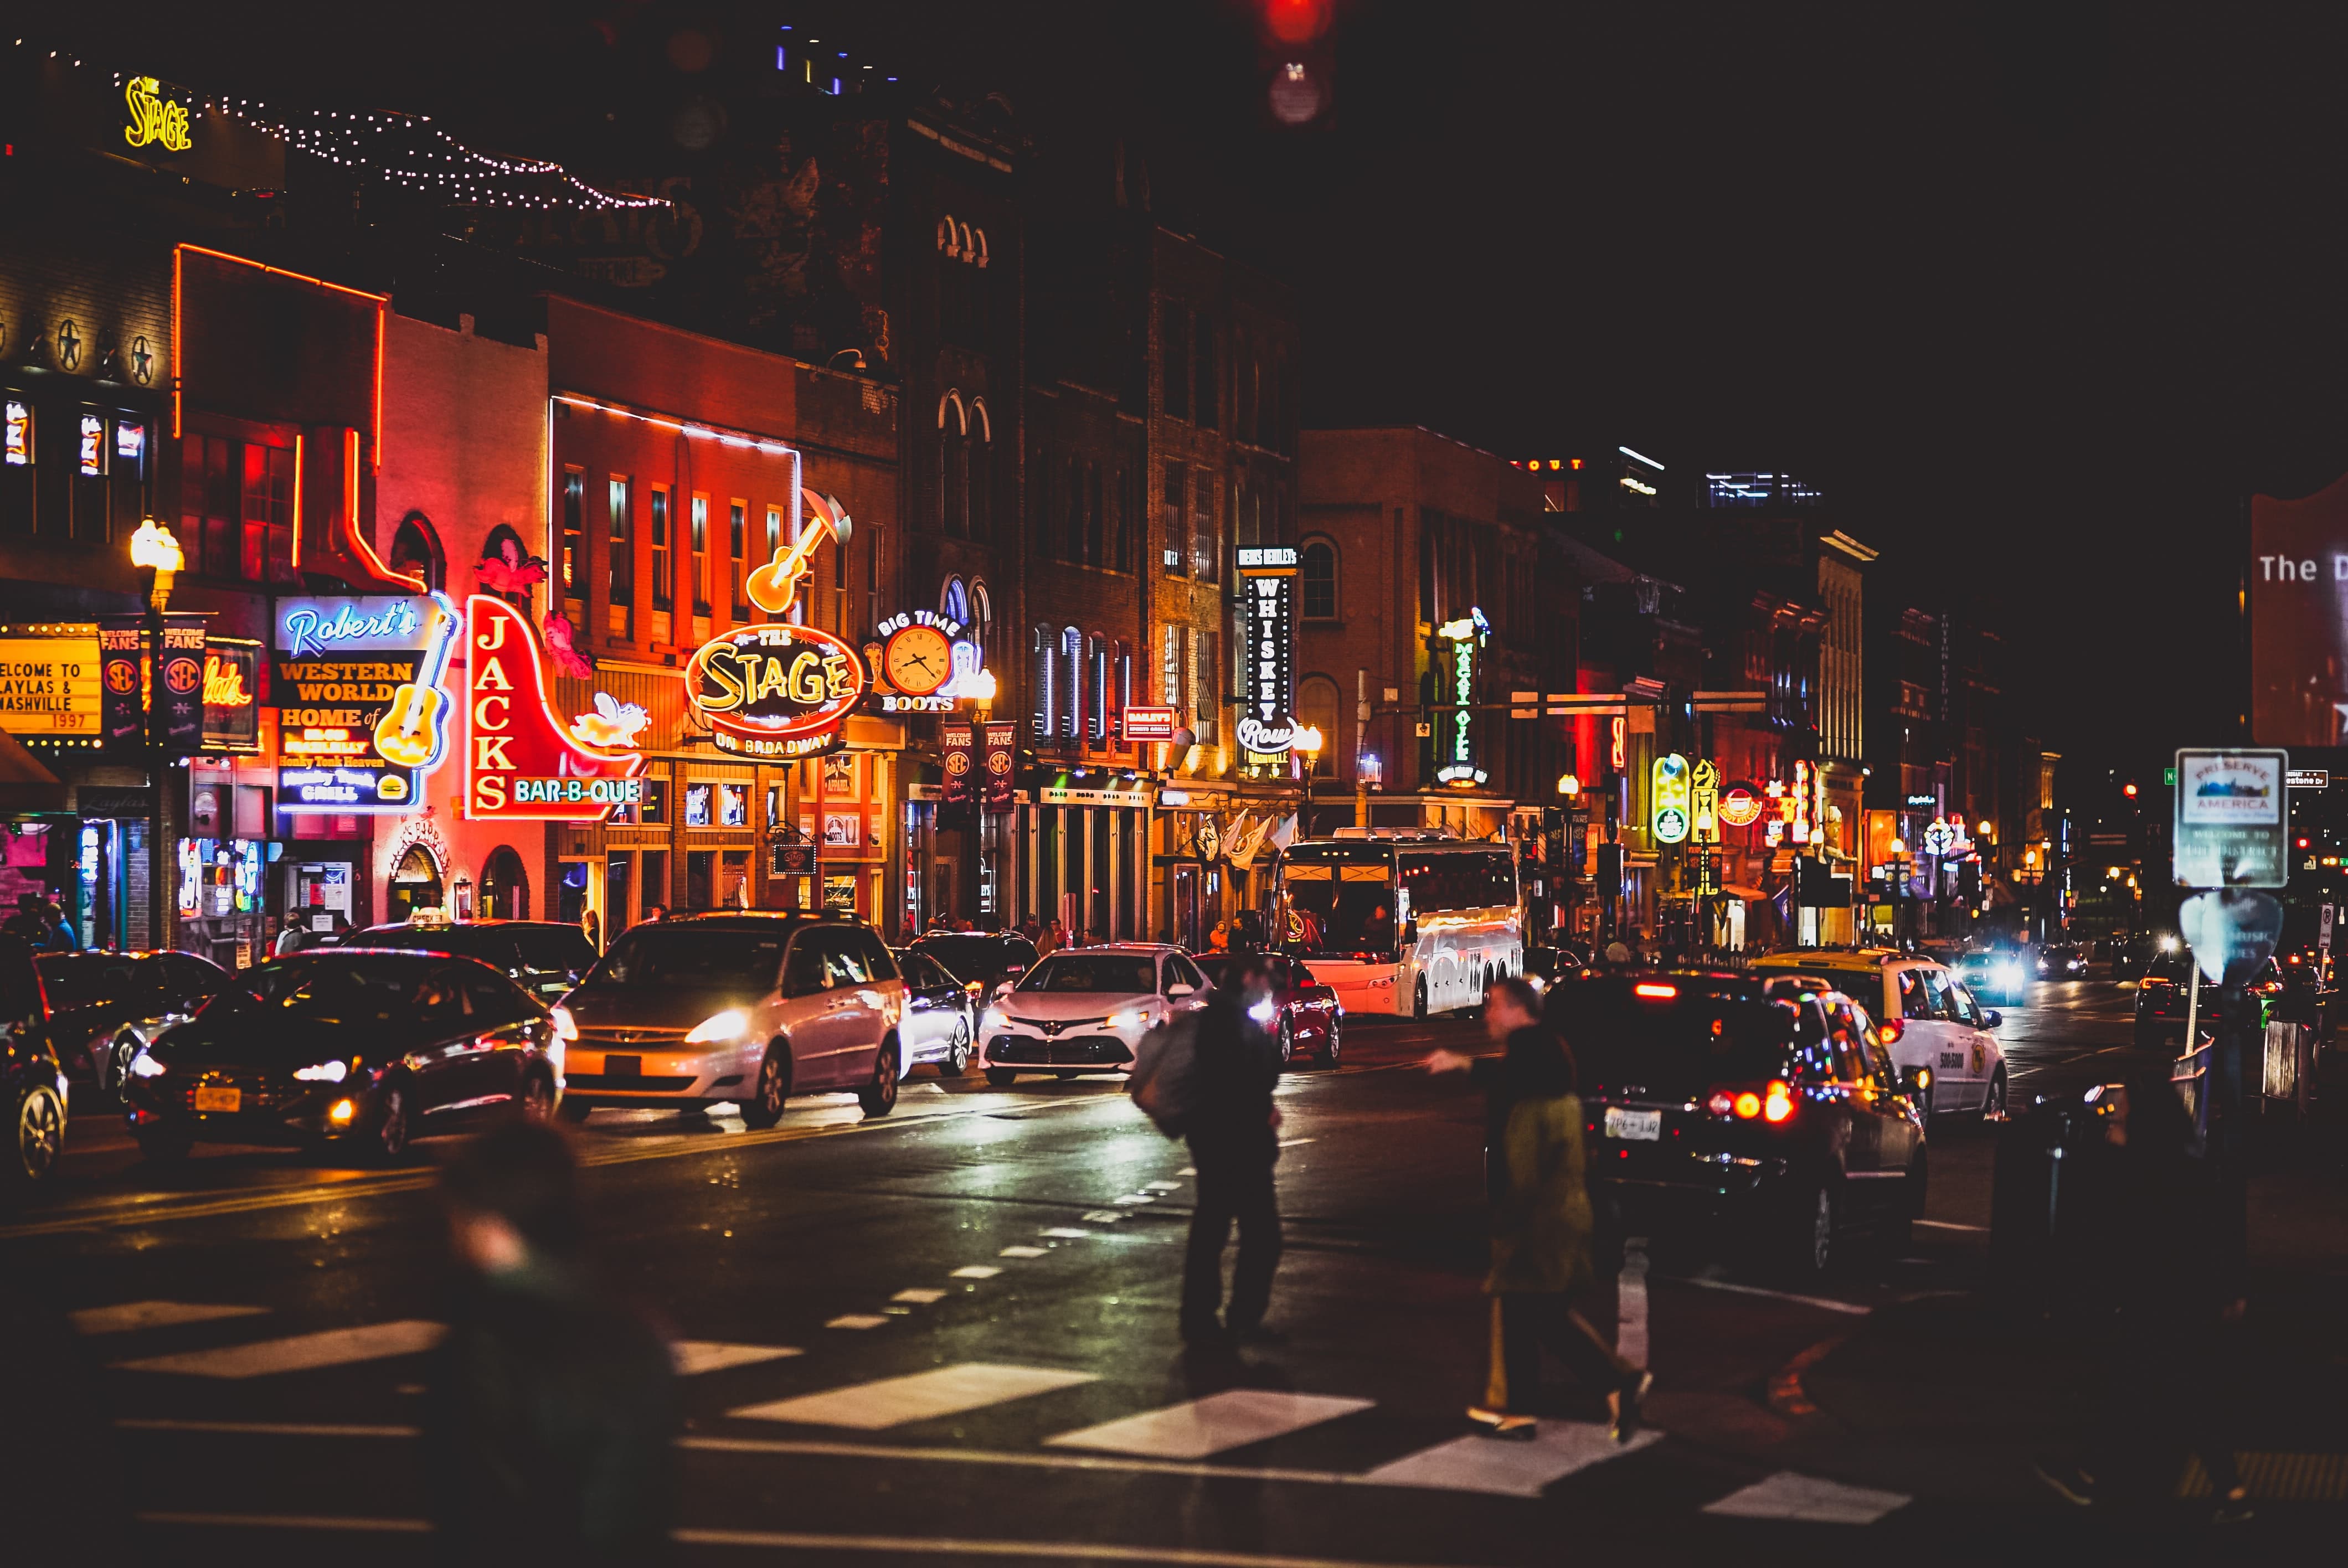 Pedestrians walk along a street lined with nightclubs and neon lights.